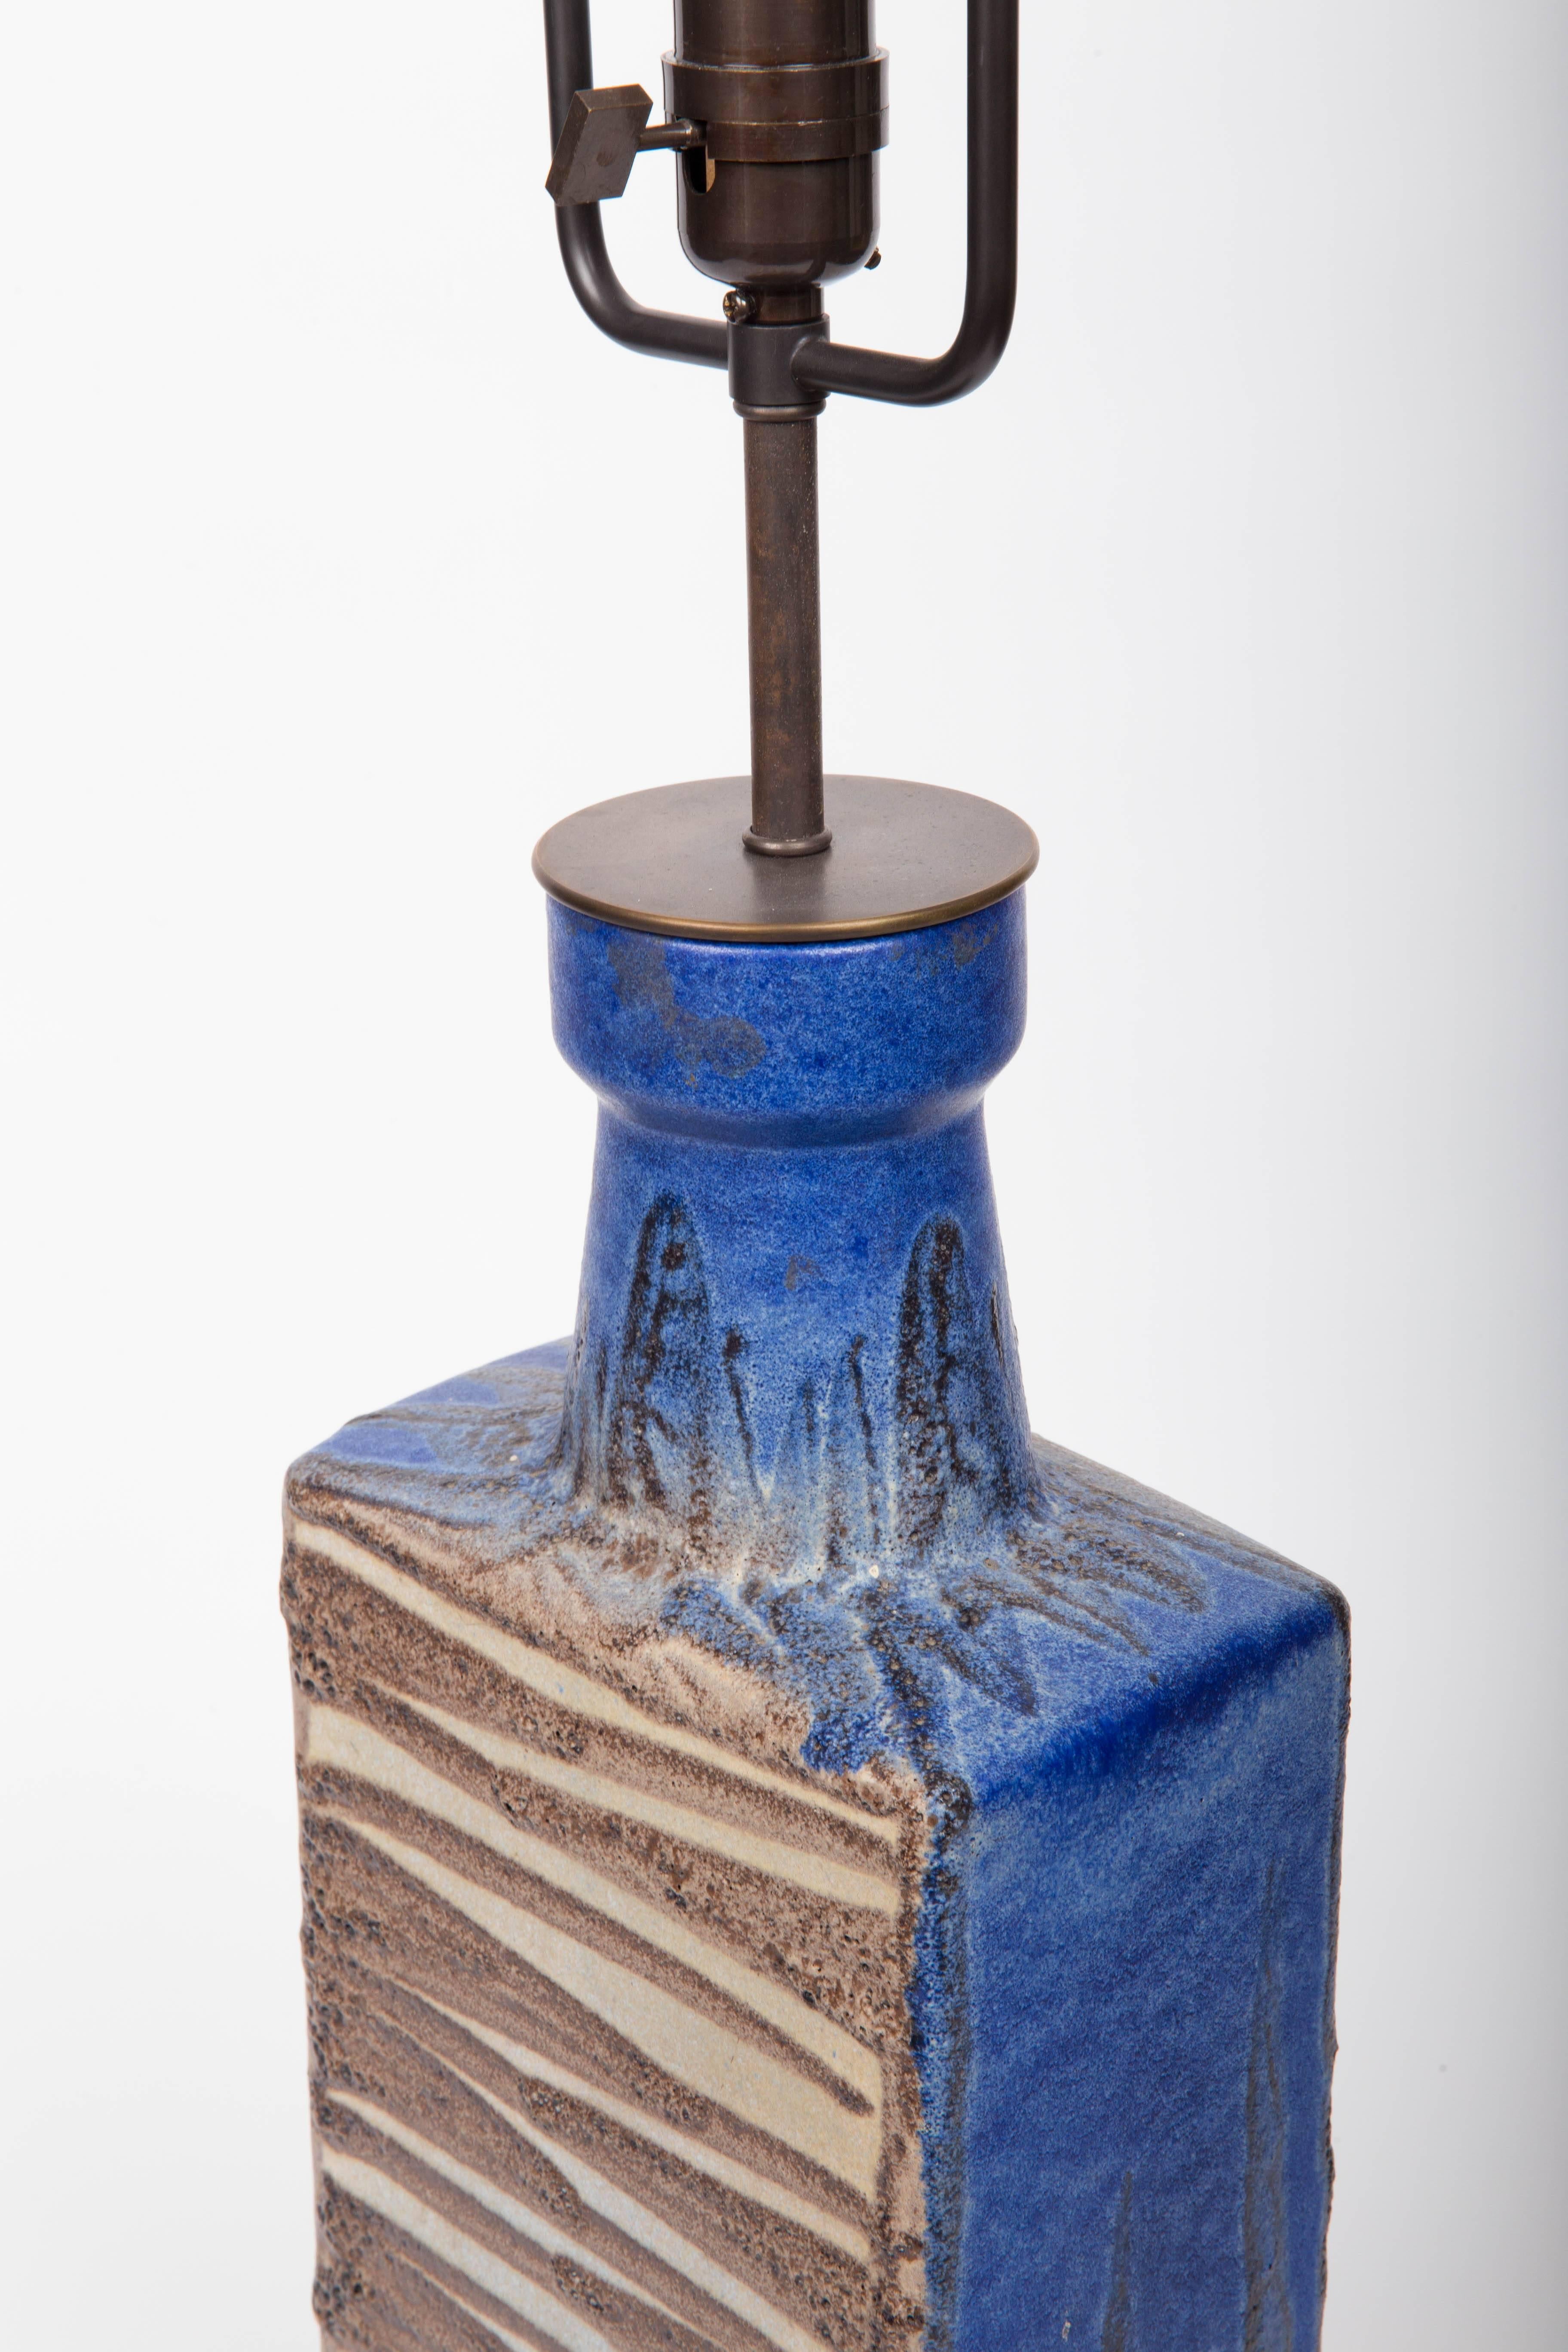 Bronze Modernist Blue and Brown Ceramic Vase, Converted into Lamp